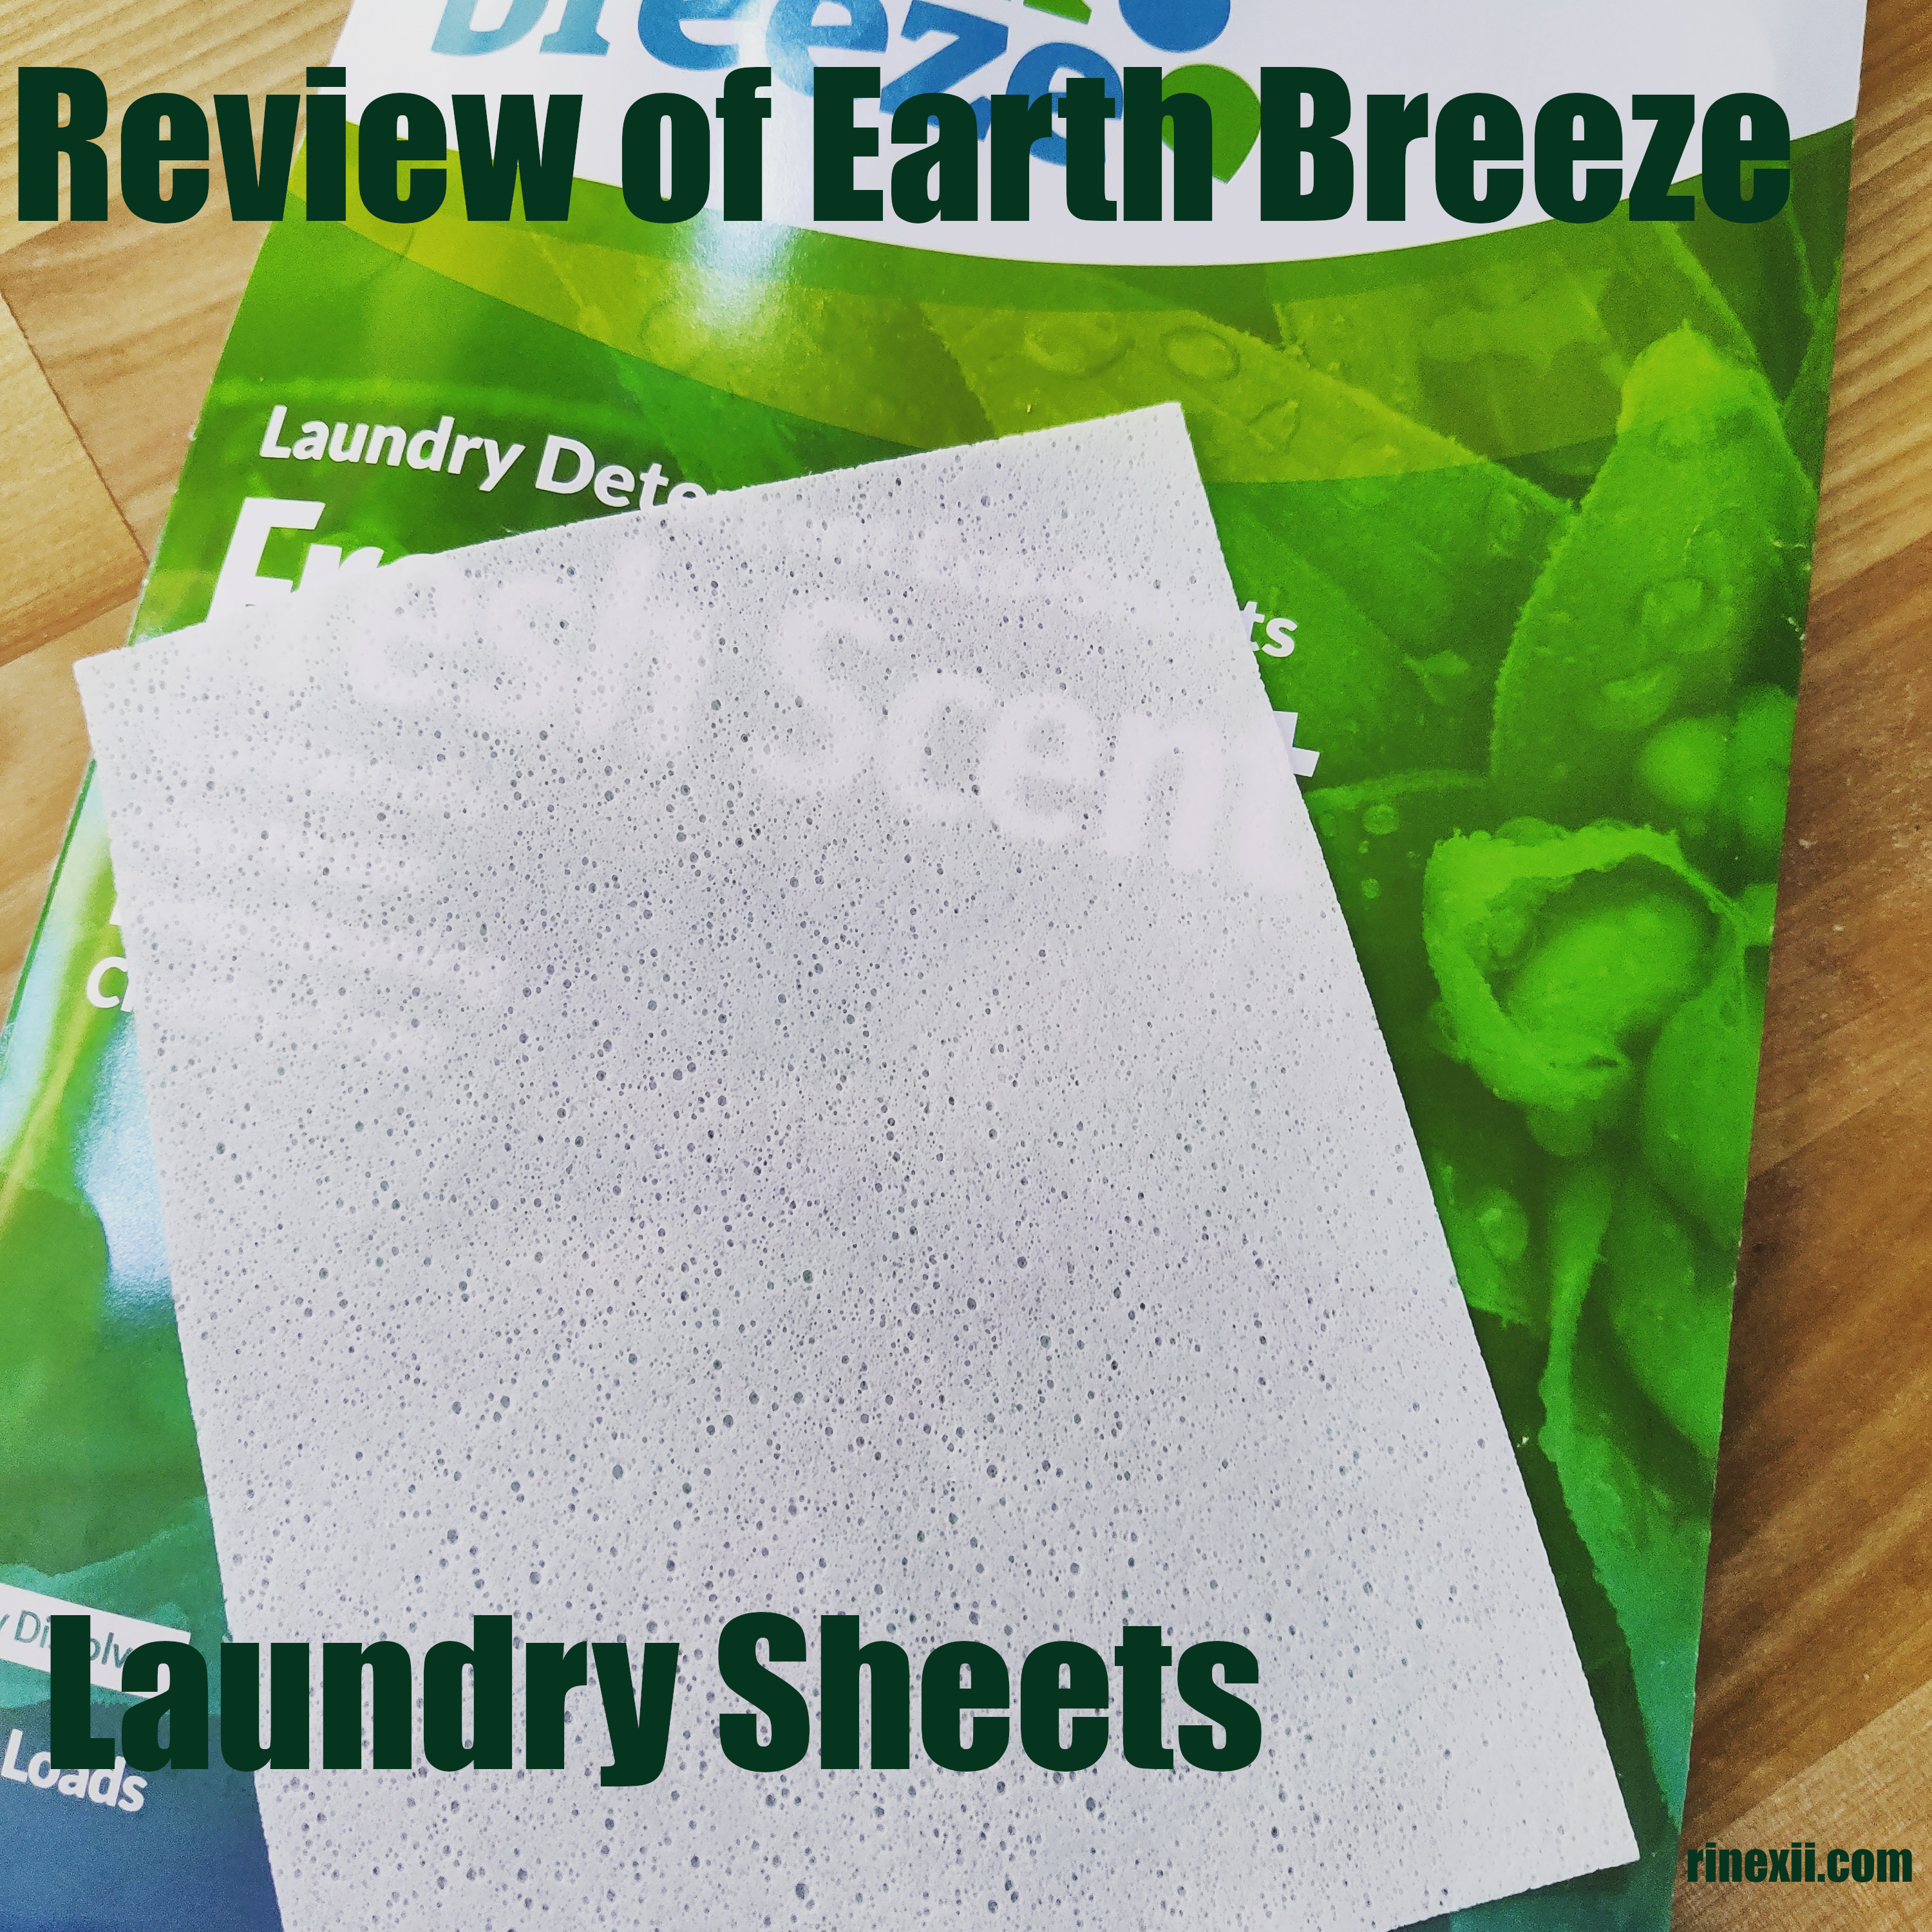 A hard look at Earth Breeze laundry sheets – Rinexii